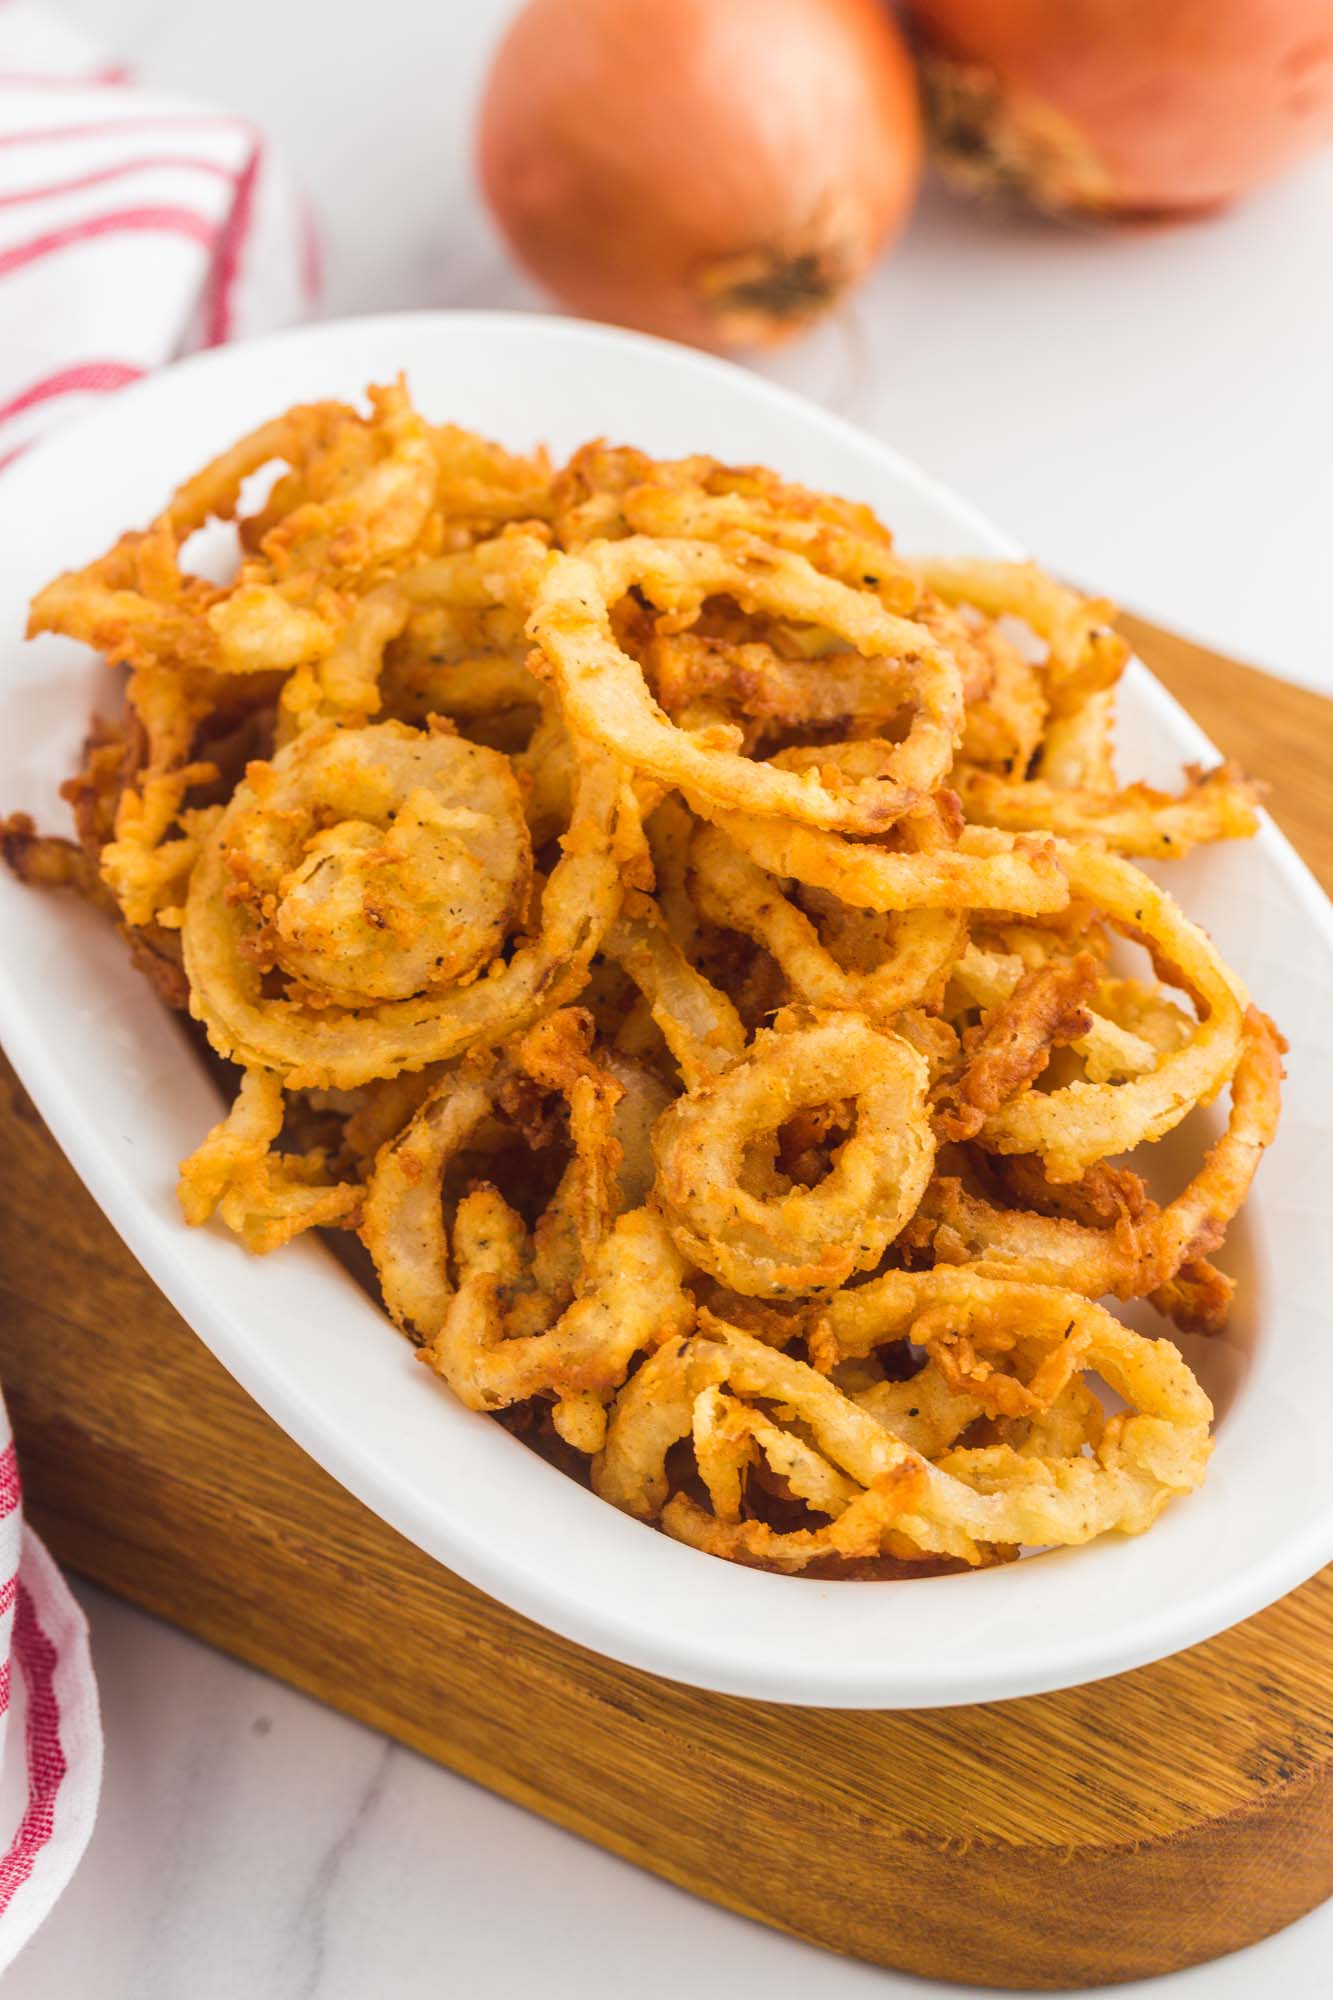 Crispy fried onions served in a small oval bowl